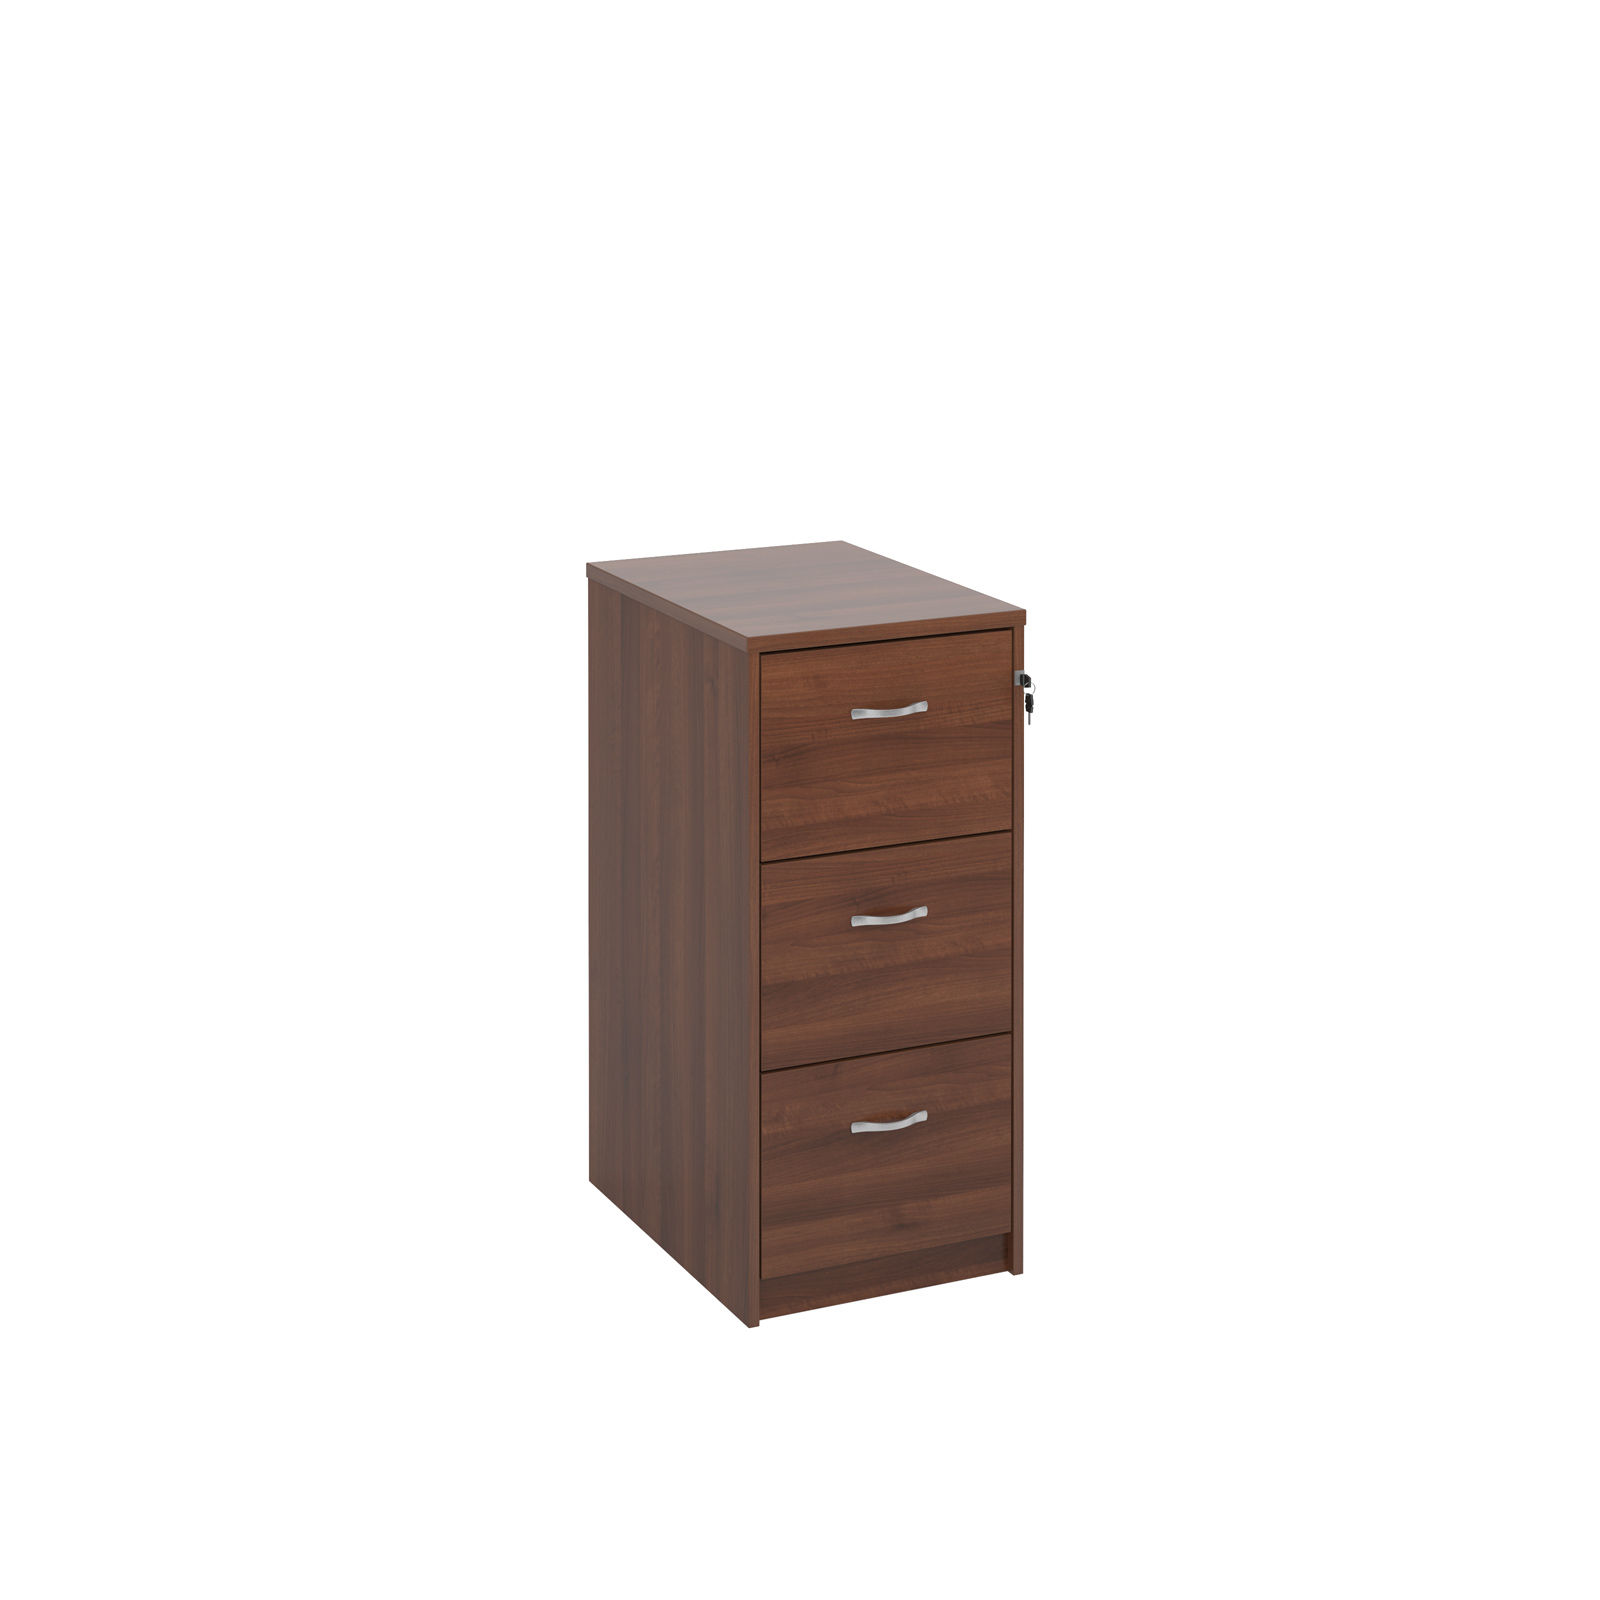 Dams 3 Drawer Wooden Filing Cabinet With Chrome Handles Walnut within measurements 1600 X 1600